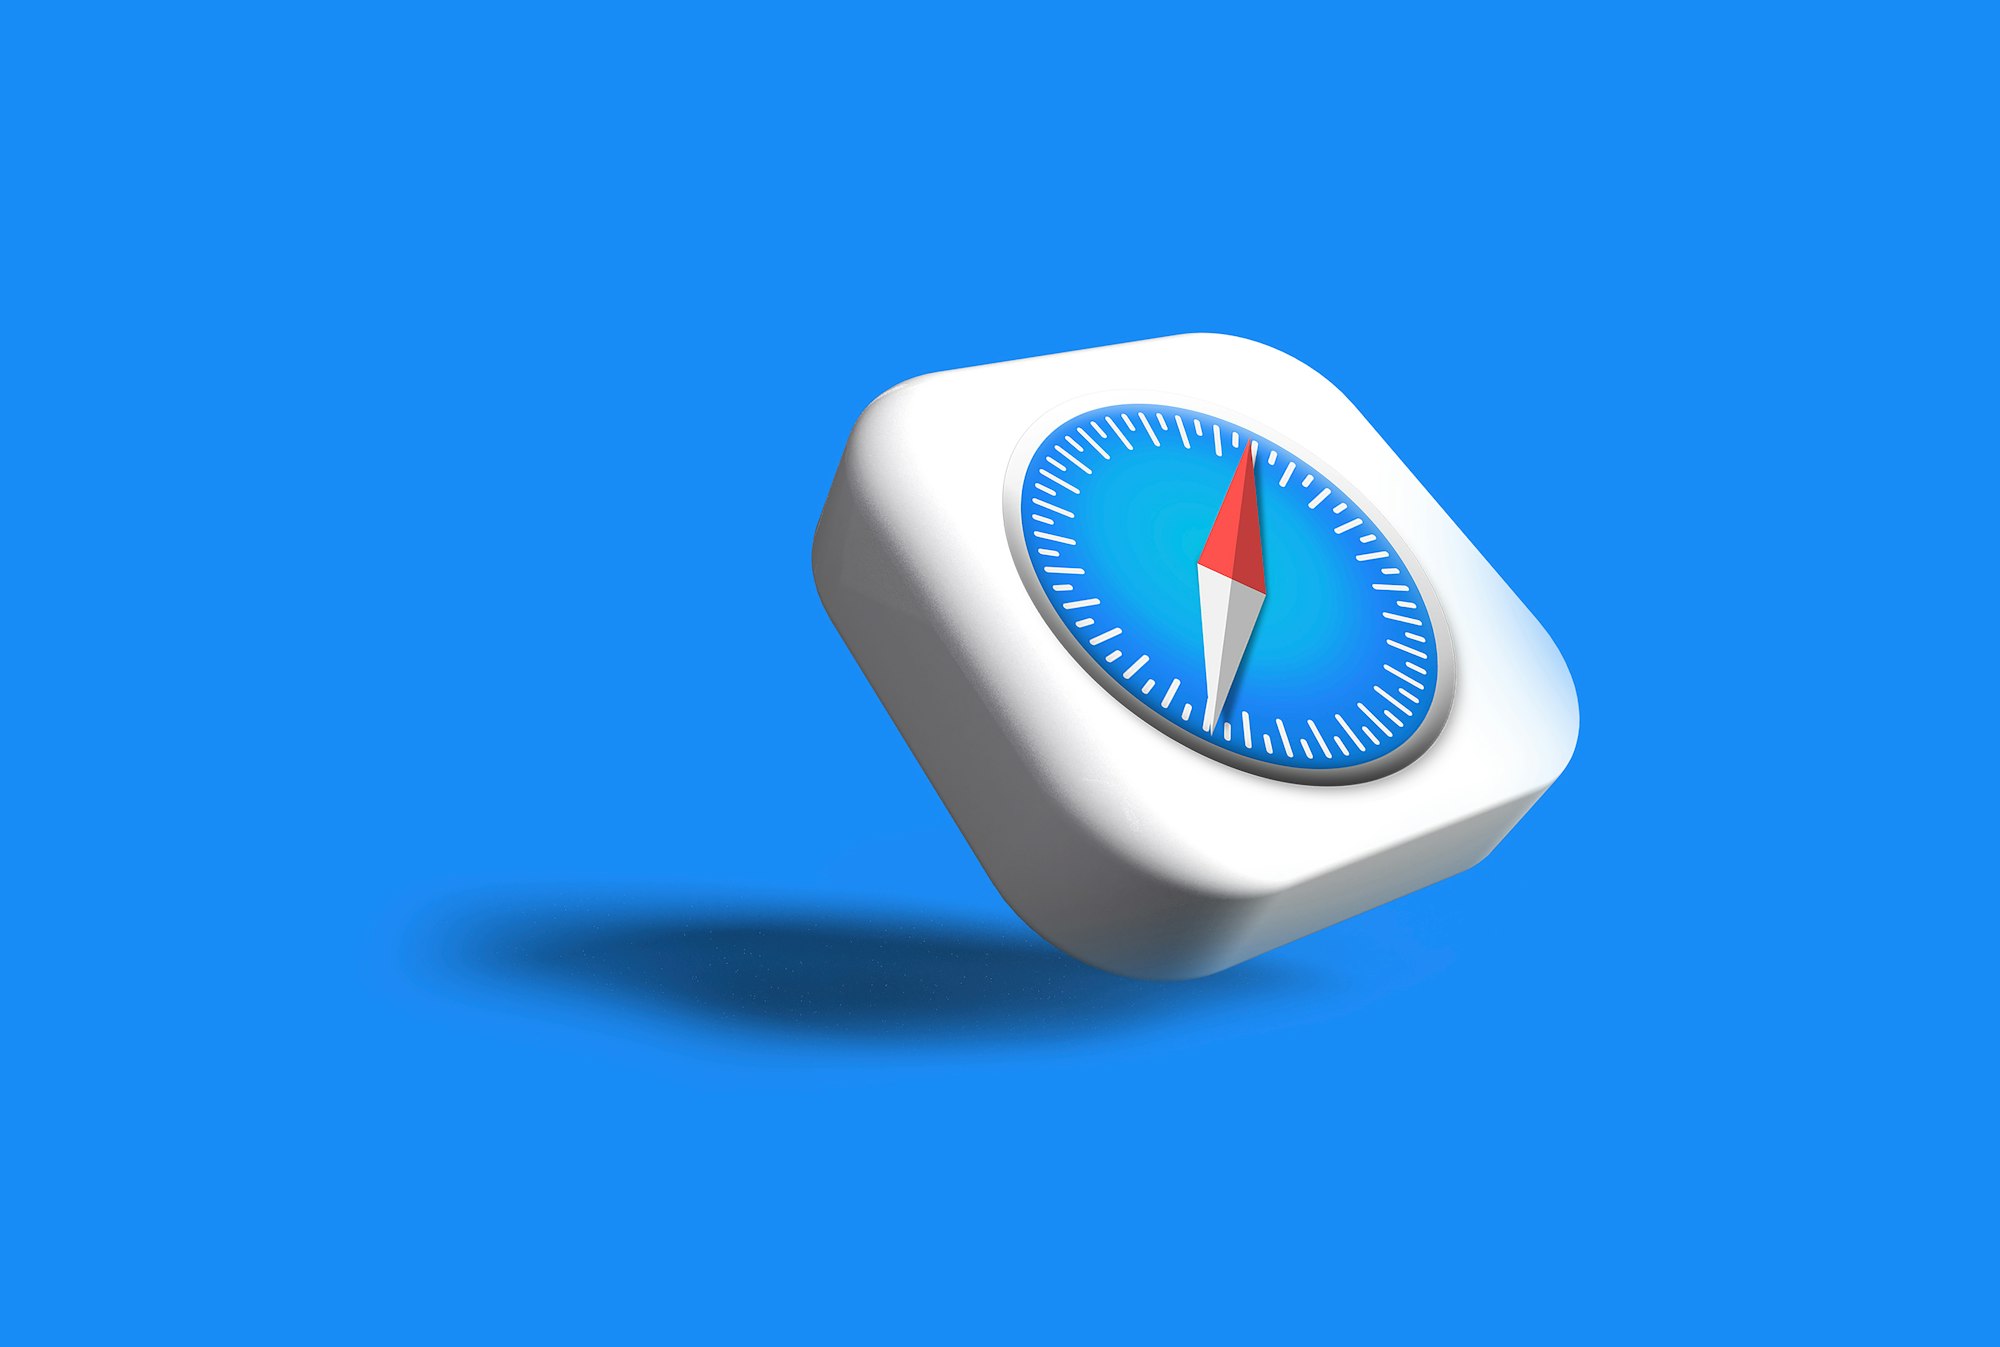 Safari Browser icon in 3D. My 3D work may be seen in the section titled "3D Render."